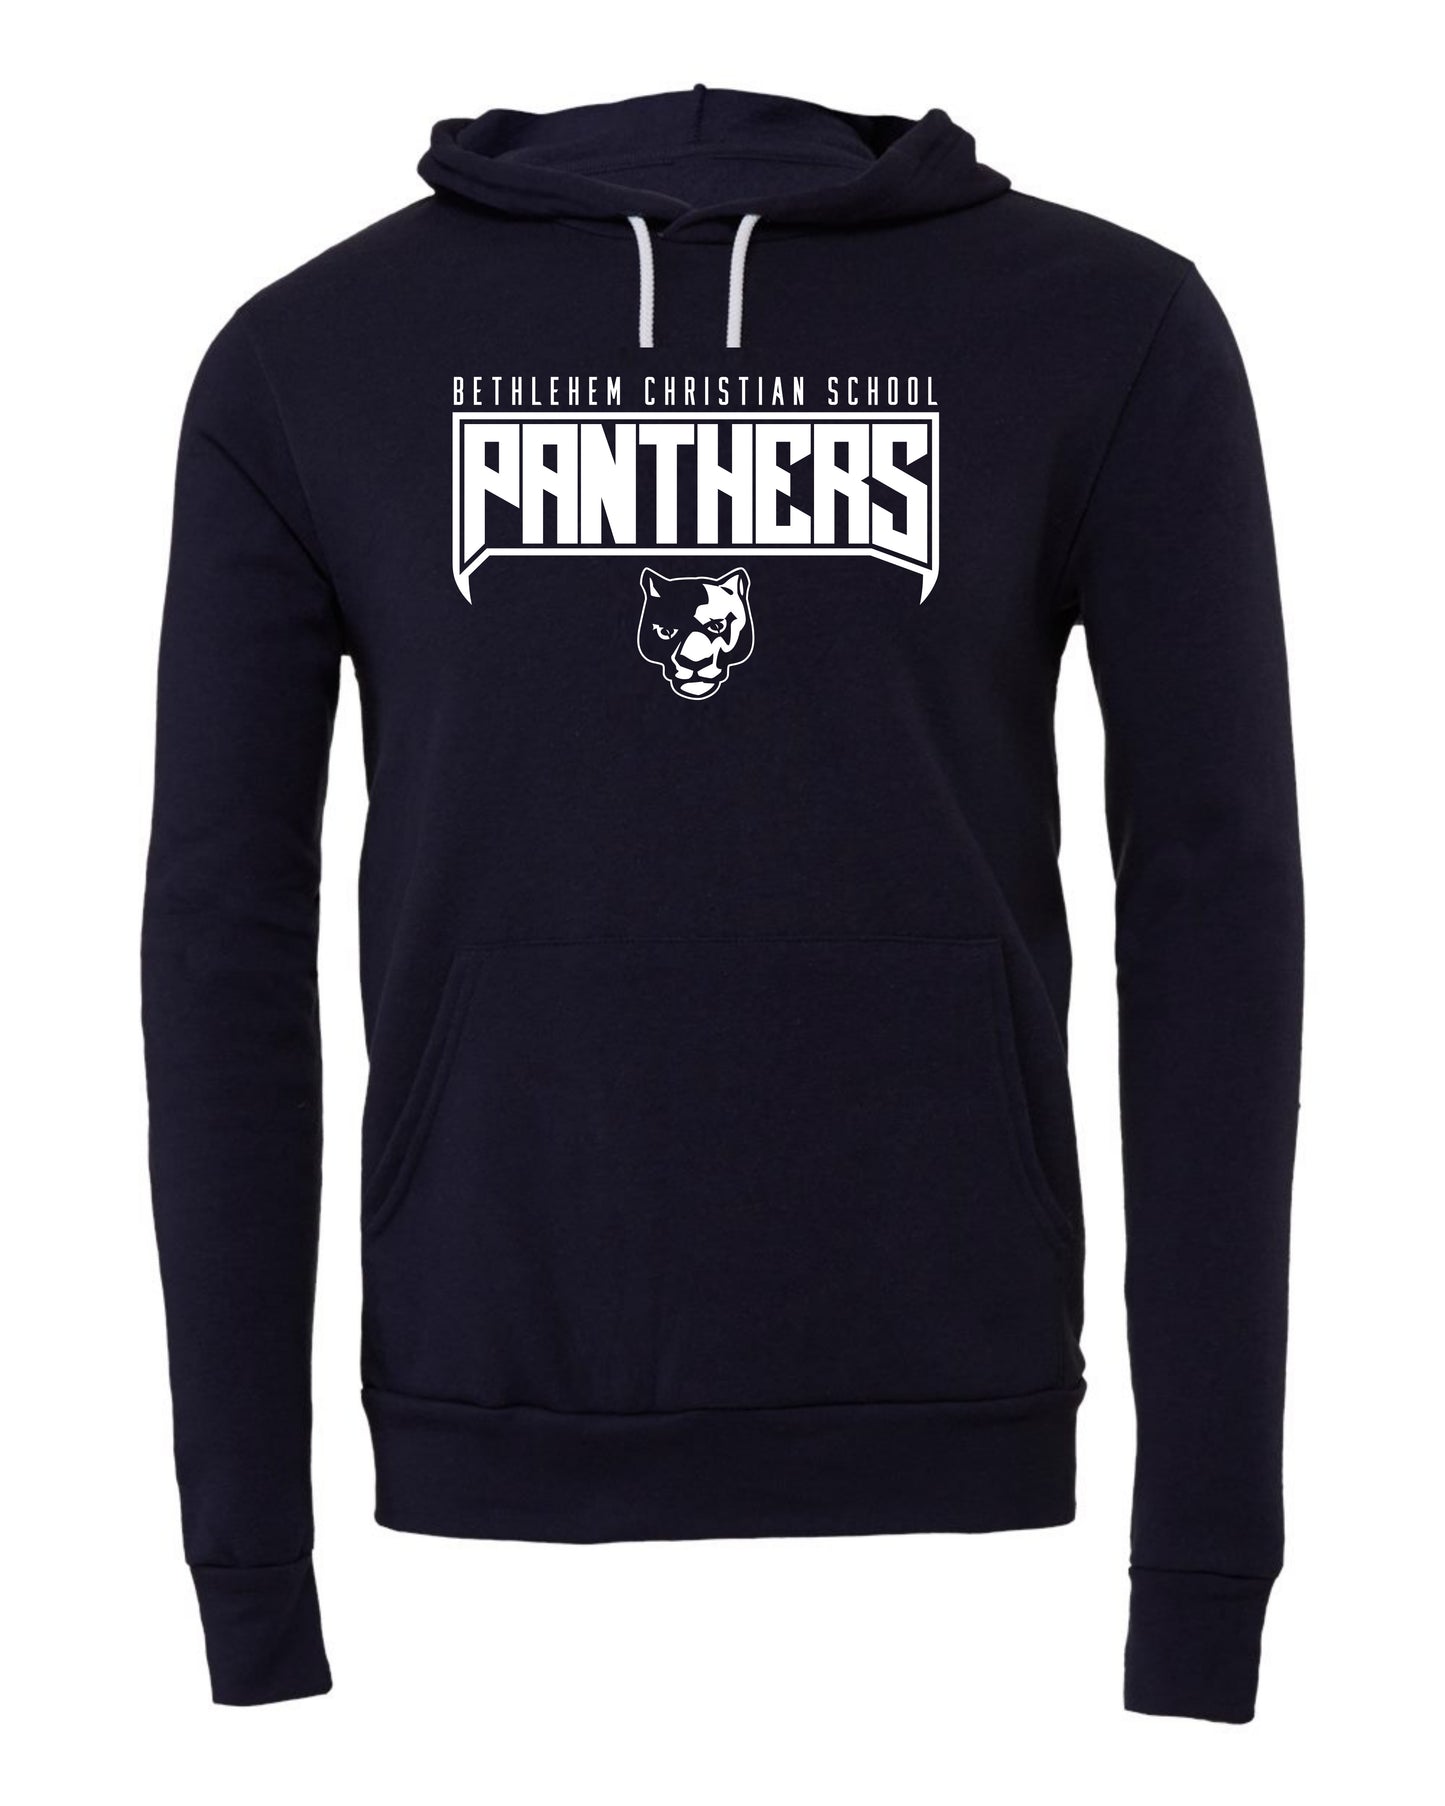 BCS Panthers Fangs - Adult Hoodie